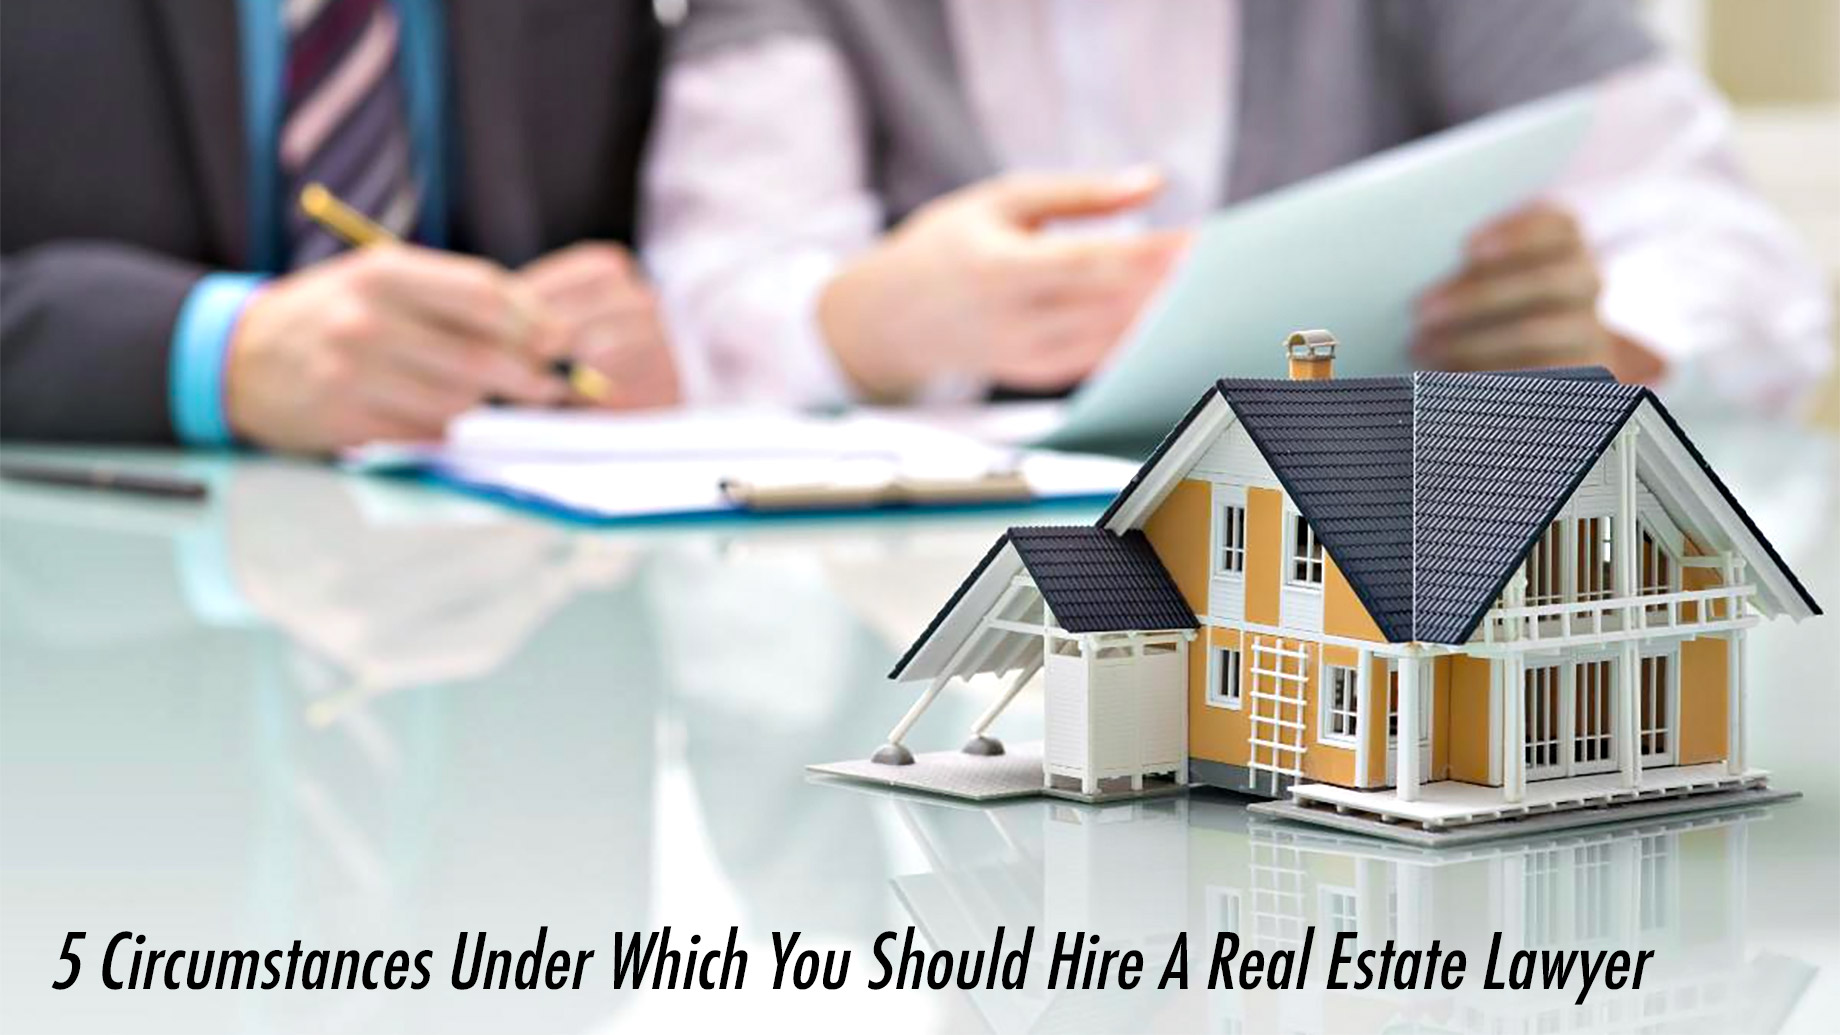 5 Circumstances Under Which You Should Hire A Real Estate Lawyer